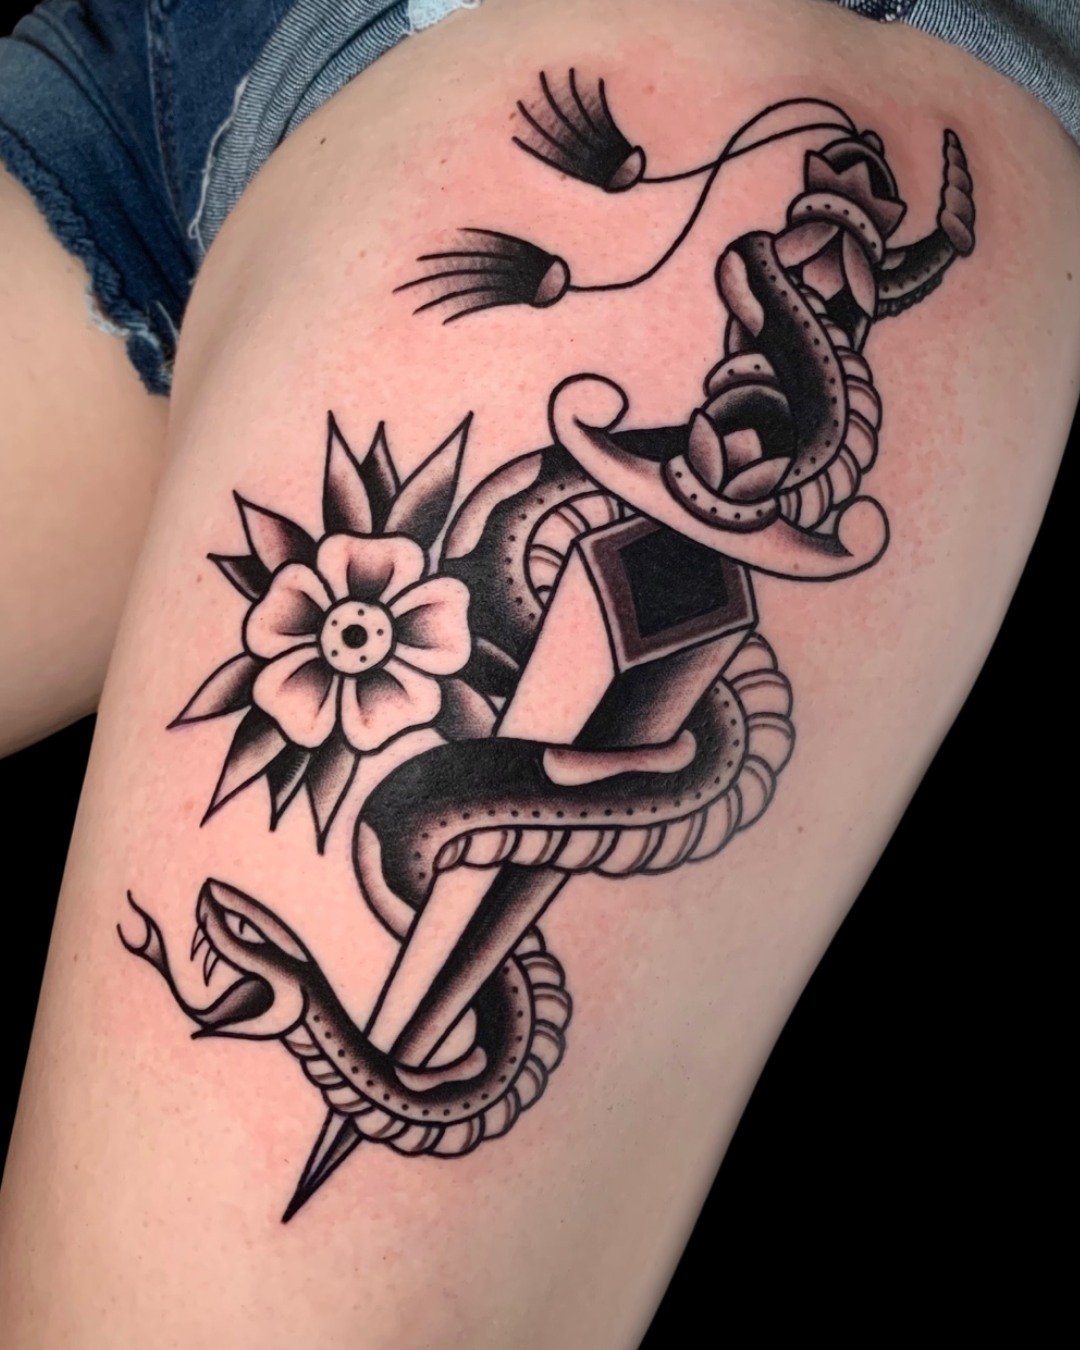 Here's our recipe for the perfect trad tattoo:
☑️ Snake 
☑️ Dagger
☑️ Flower
Mix with years of experience provided by @michelparisay and let stand for 3-4 weeks before unveiling 🖤 

Ready to get cooking with Michel? Choose from his fabulous lineup o